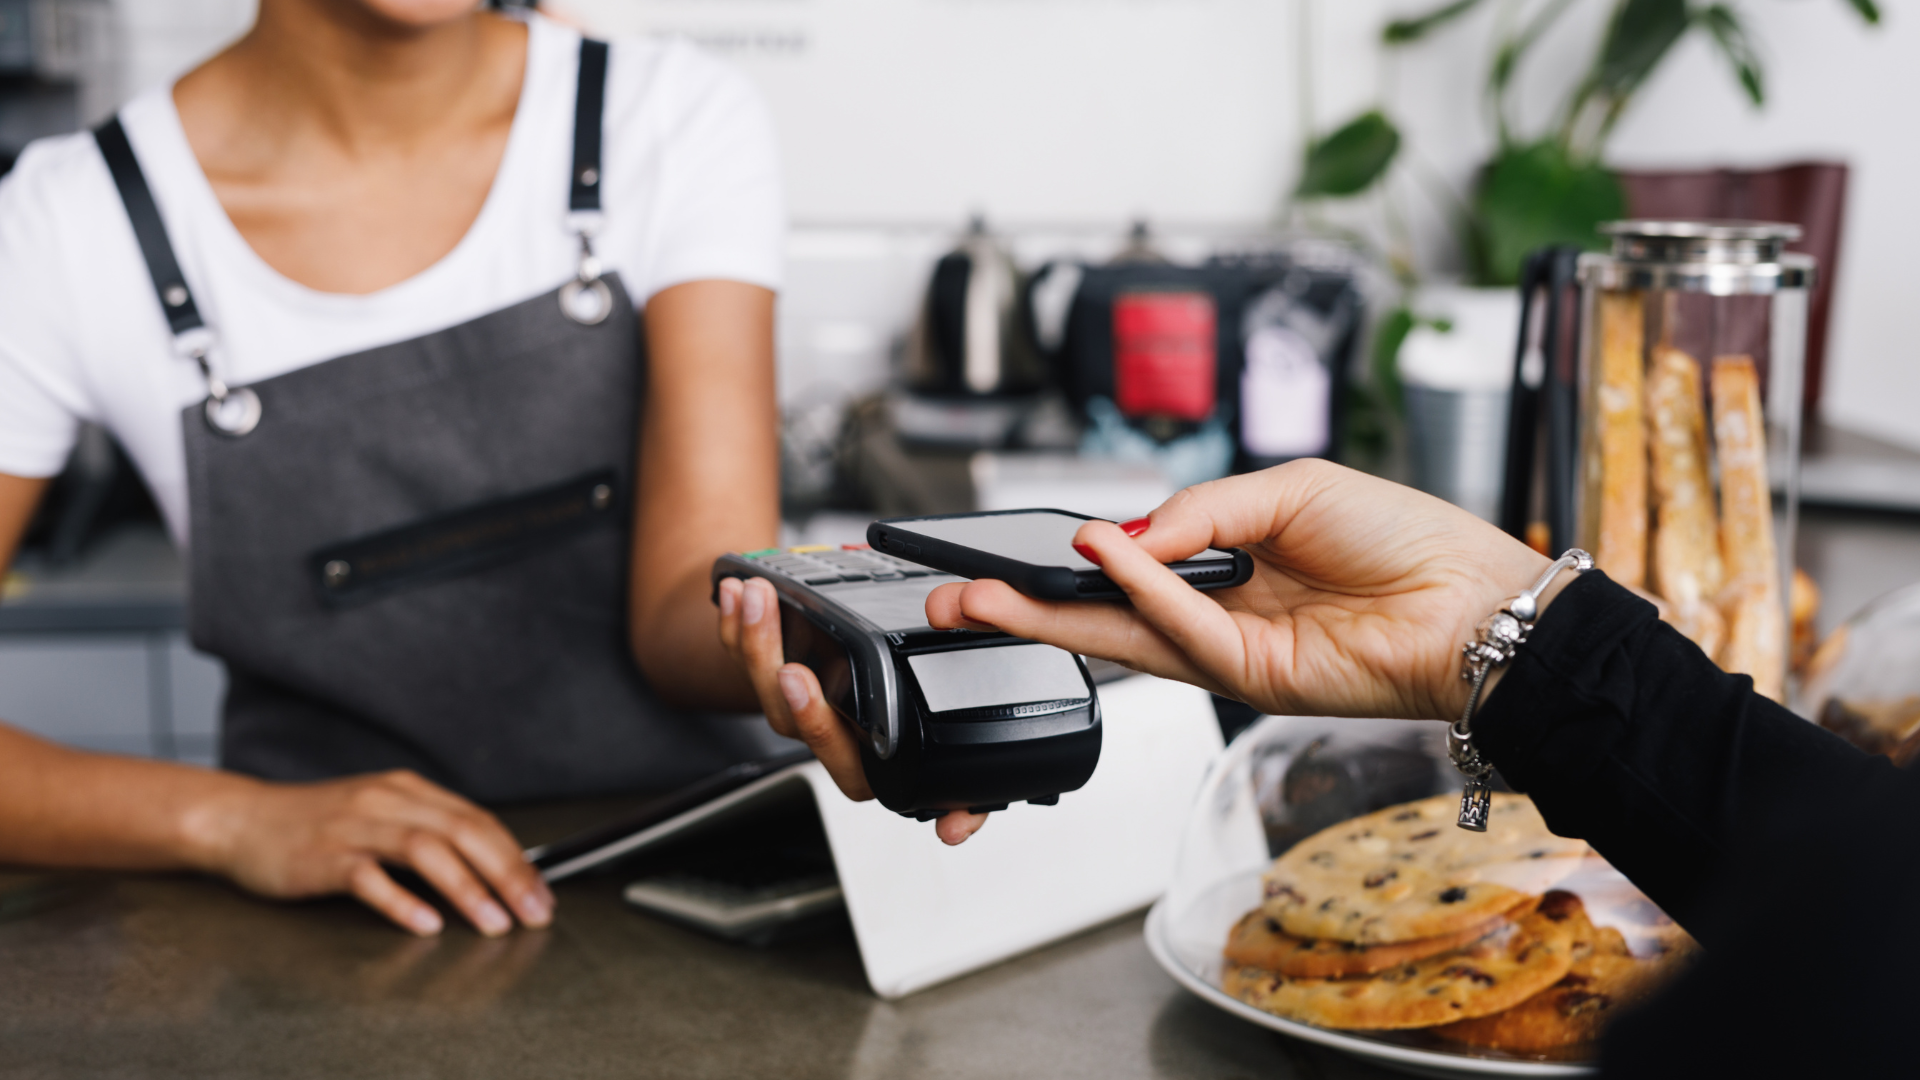 point-of-sales-pos-system-payment